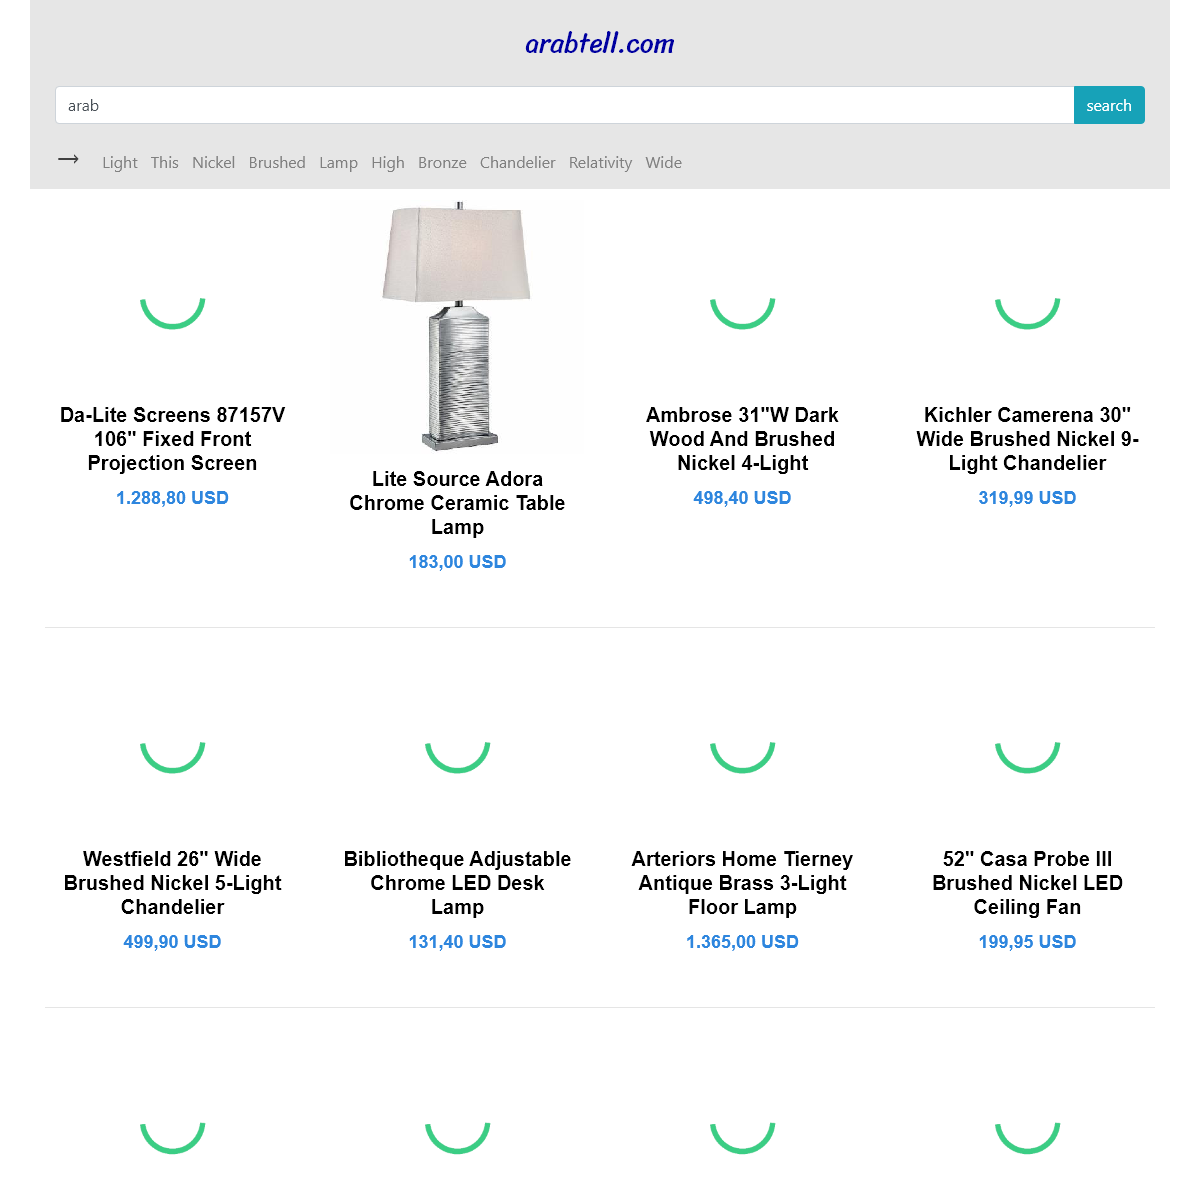 A complete backup of arabtell.com